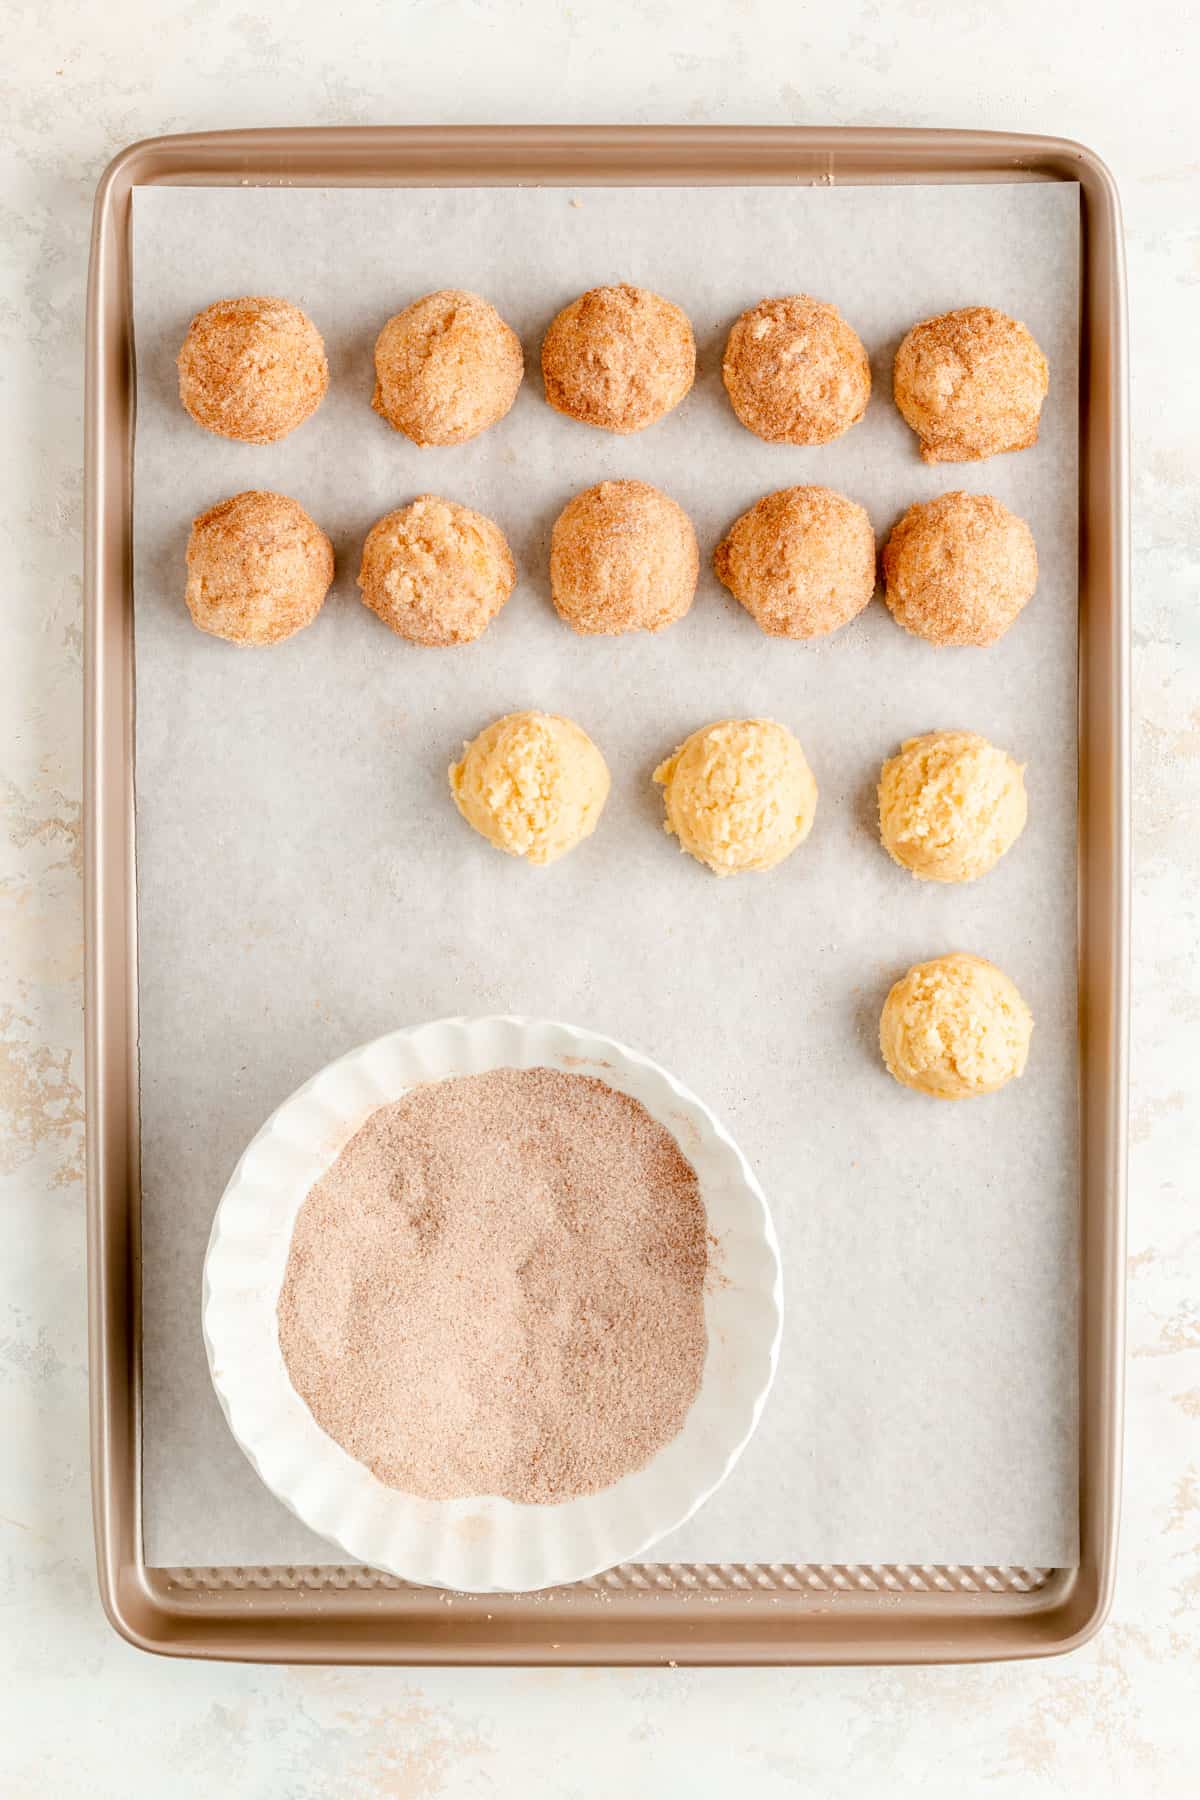 overhead of tan baking sheet with plain and coated dough balls and bowl of cinnamon sugar.